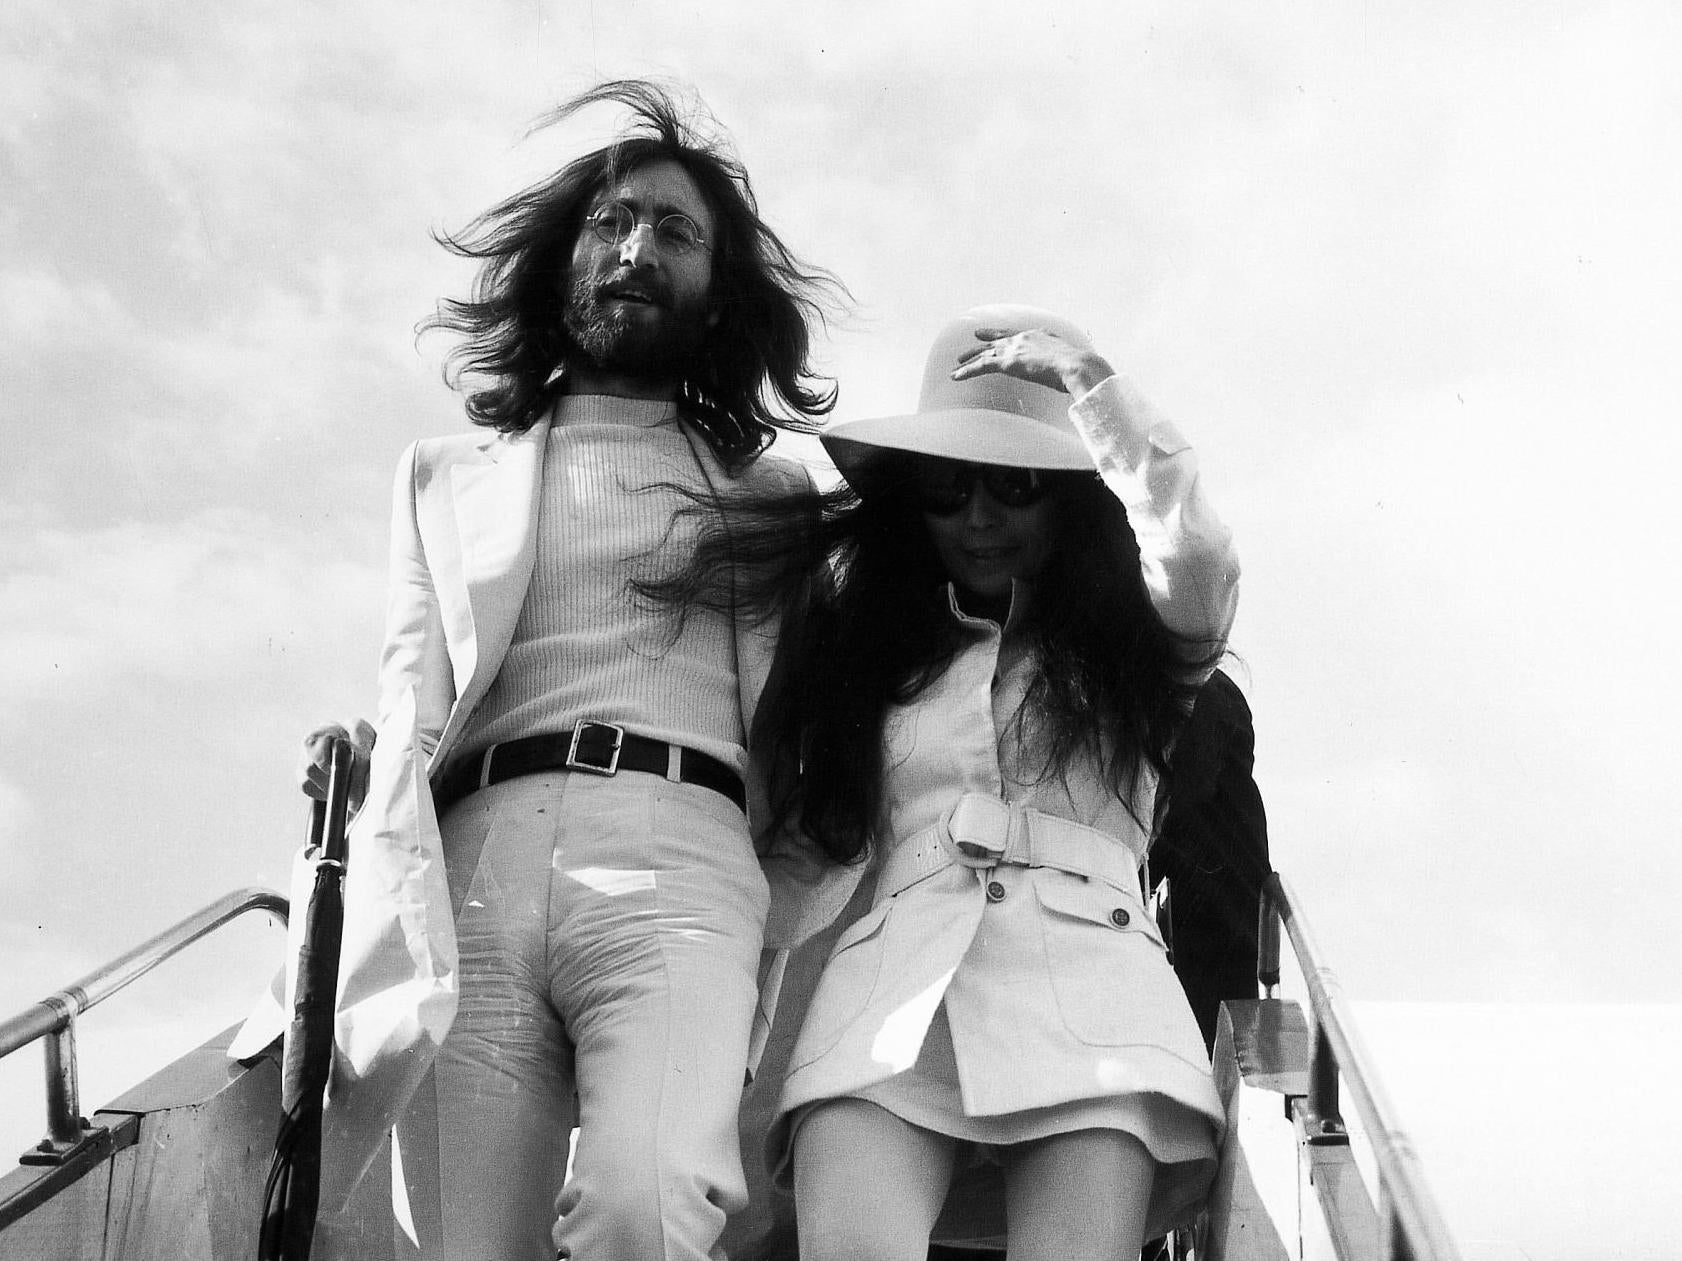 John Lennon and Yoko Ono arrive at London Airport in 1969